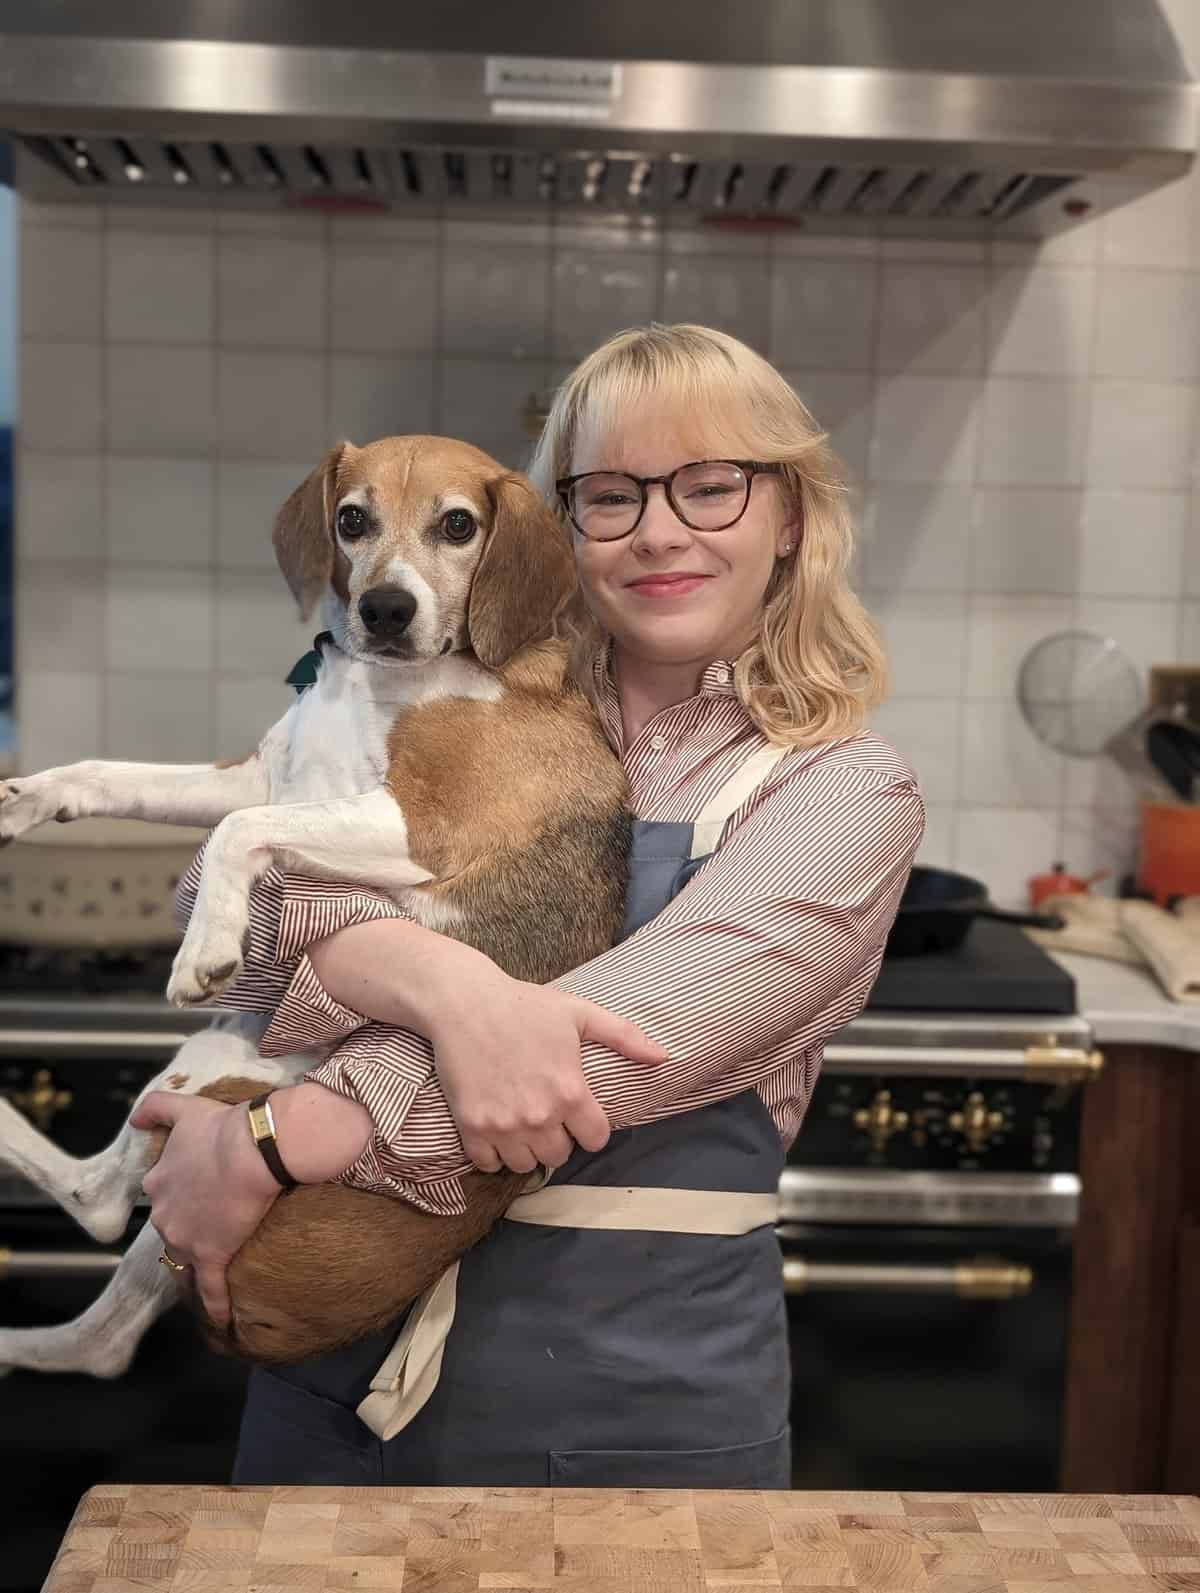 A woman holding a dog in a kitchen.